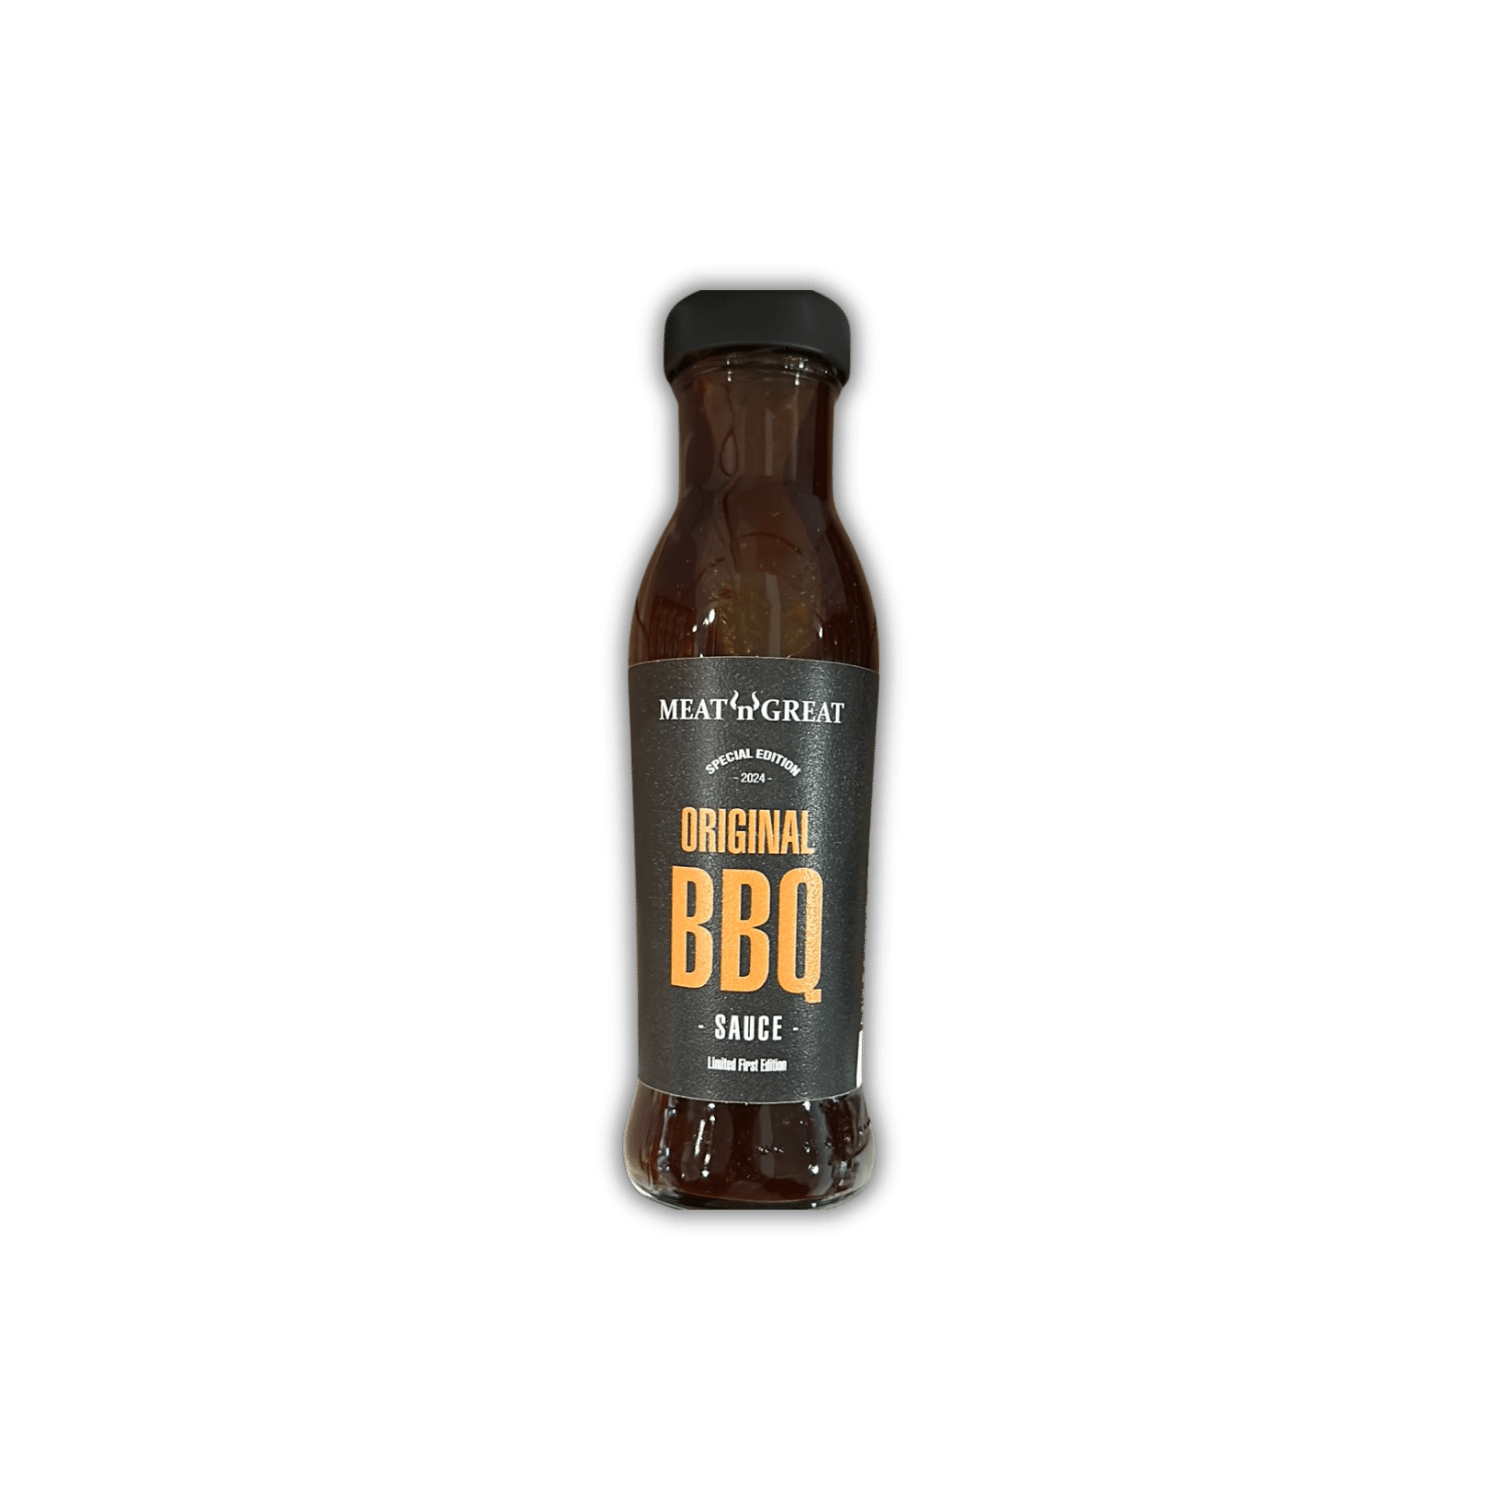 BBQ Original Sauce | Limited First Edition | MeatNGreat